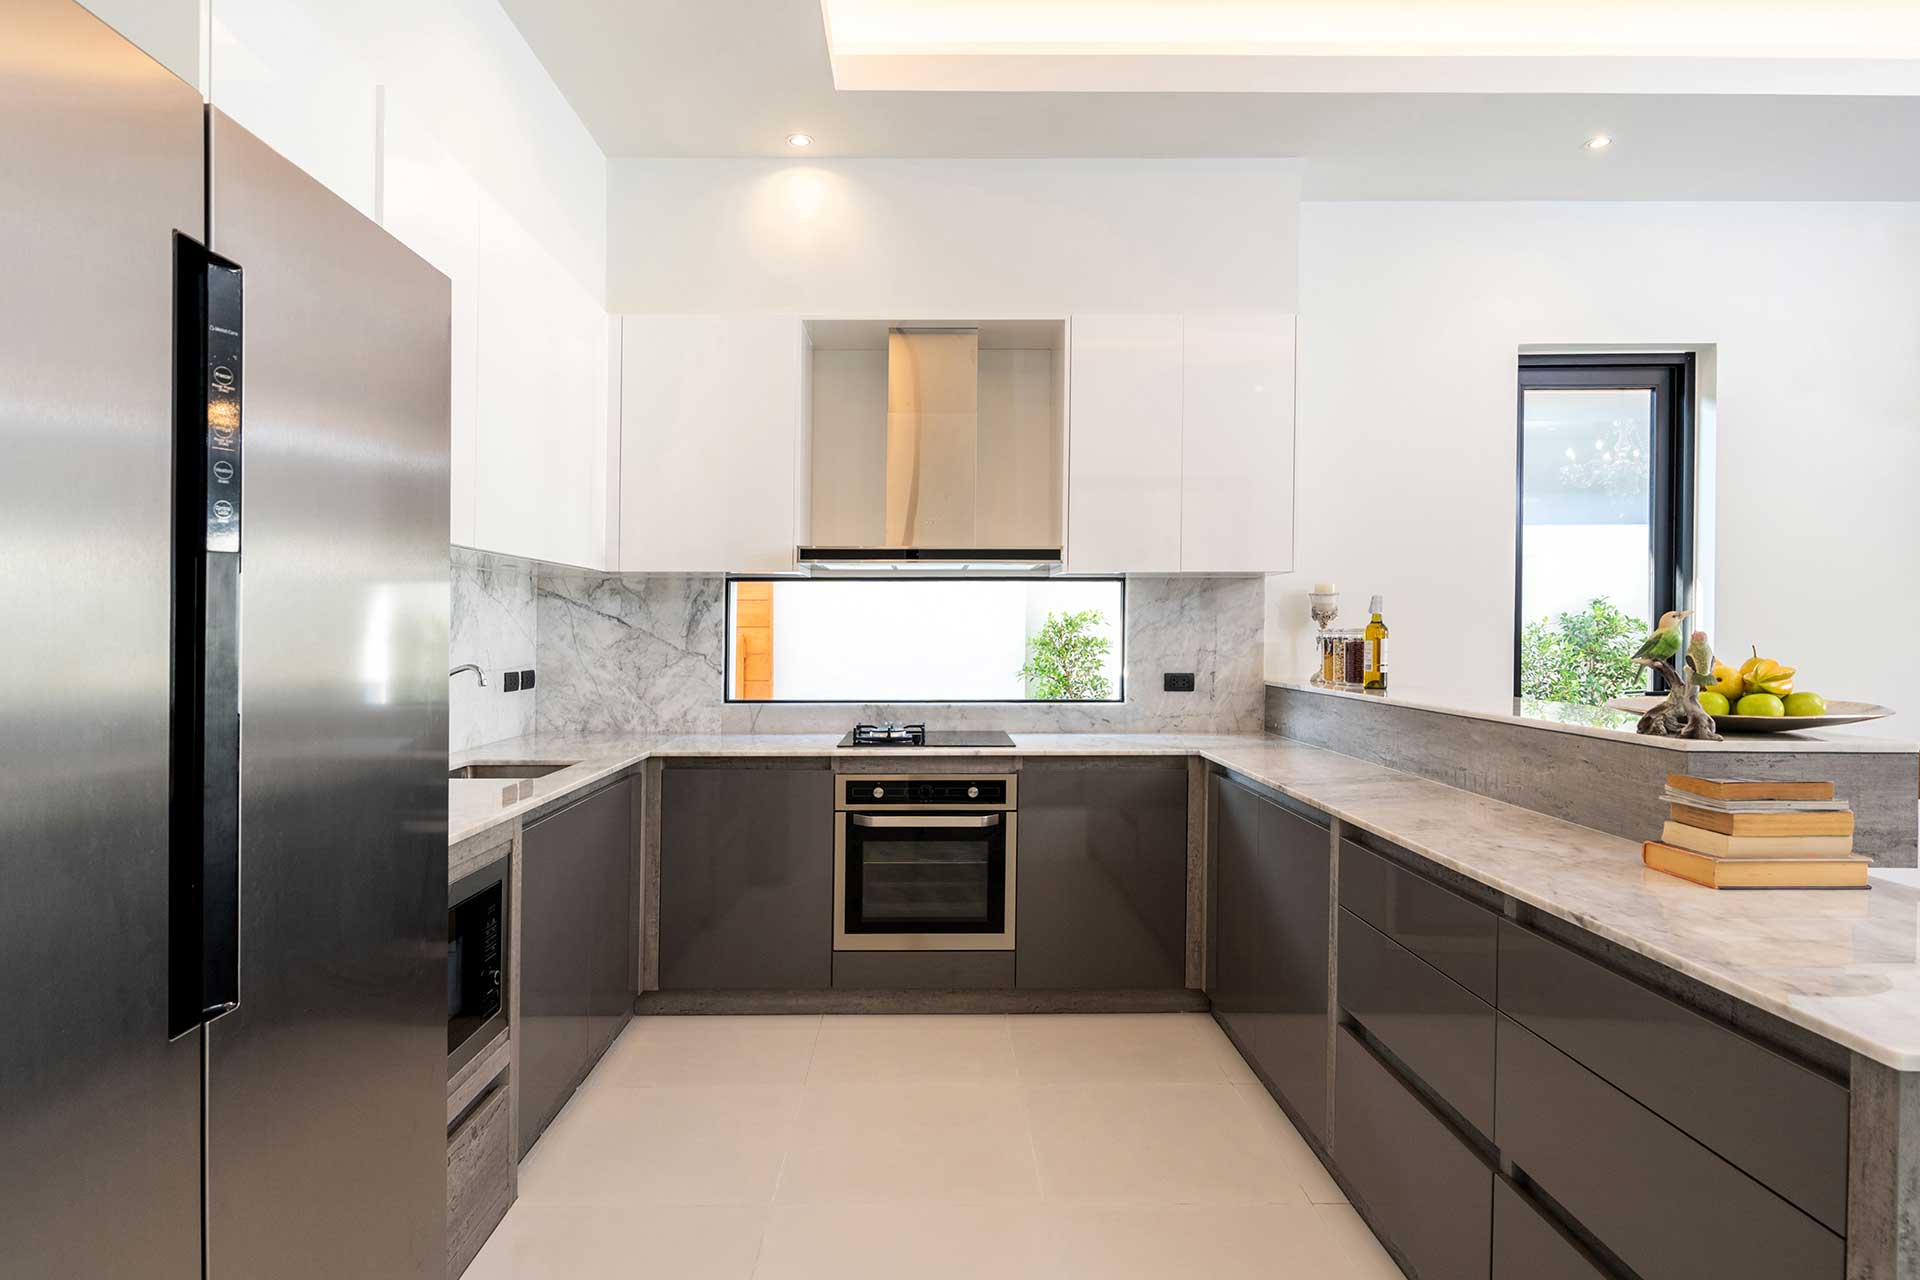 Modern kitchen with bottom black cabinets and top white cabinets, without handles and cream counters